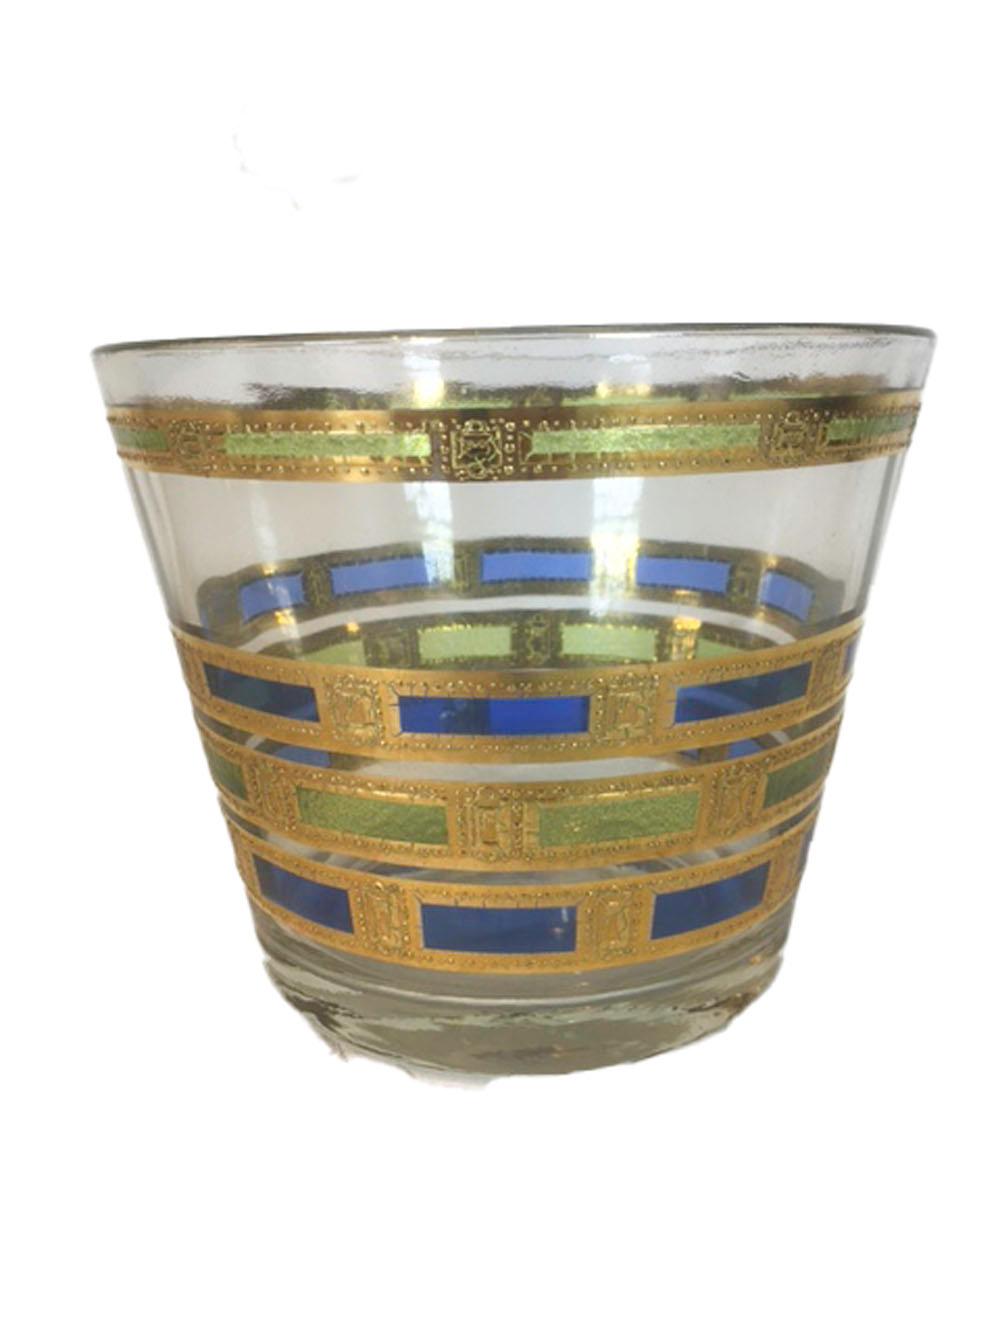 Vintage culver glassware, 13 piece barware set in the Empress pattern. Including 1 ice bowl, 6 highball & 6 rocks glasses, all decorated with bands of blue and green translucent enamels with 22-karat gold.

Measures: 1 - Ice bowl: 4-3/4